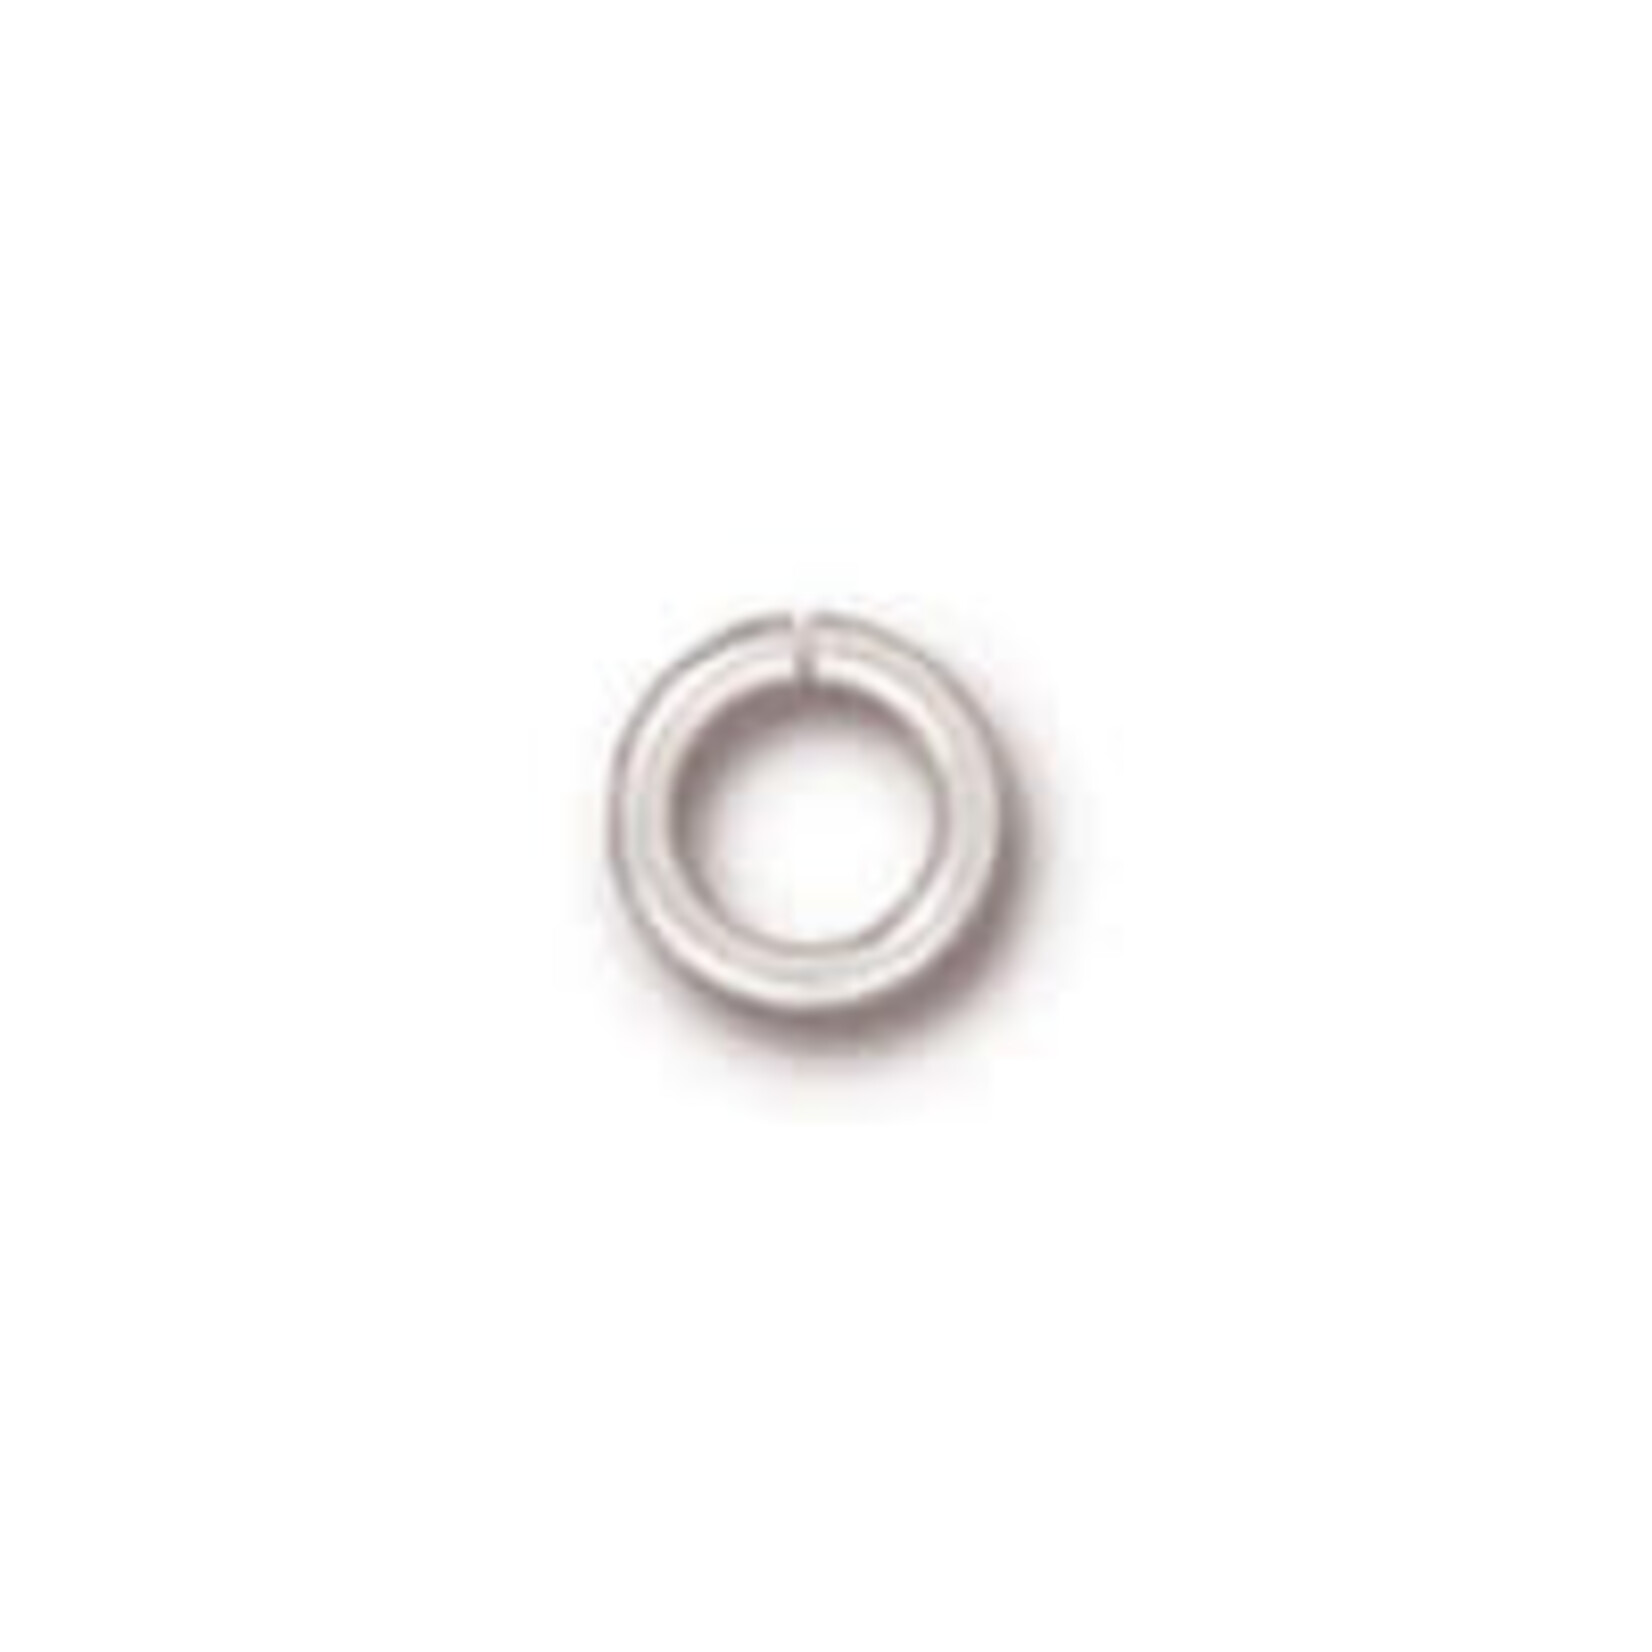 TierraCast Silver Plated Round Jump Ring 16 Ga, 5mm ID 8mm OD- 20 pieces